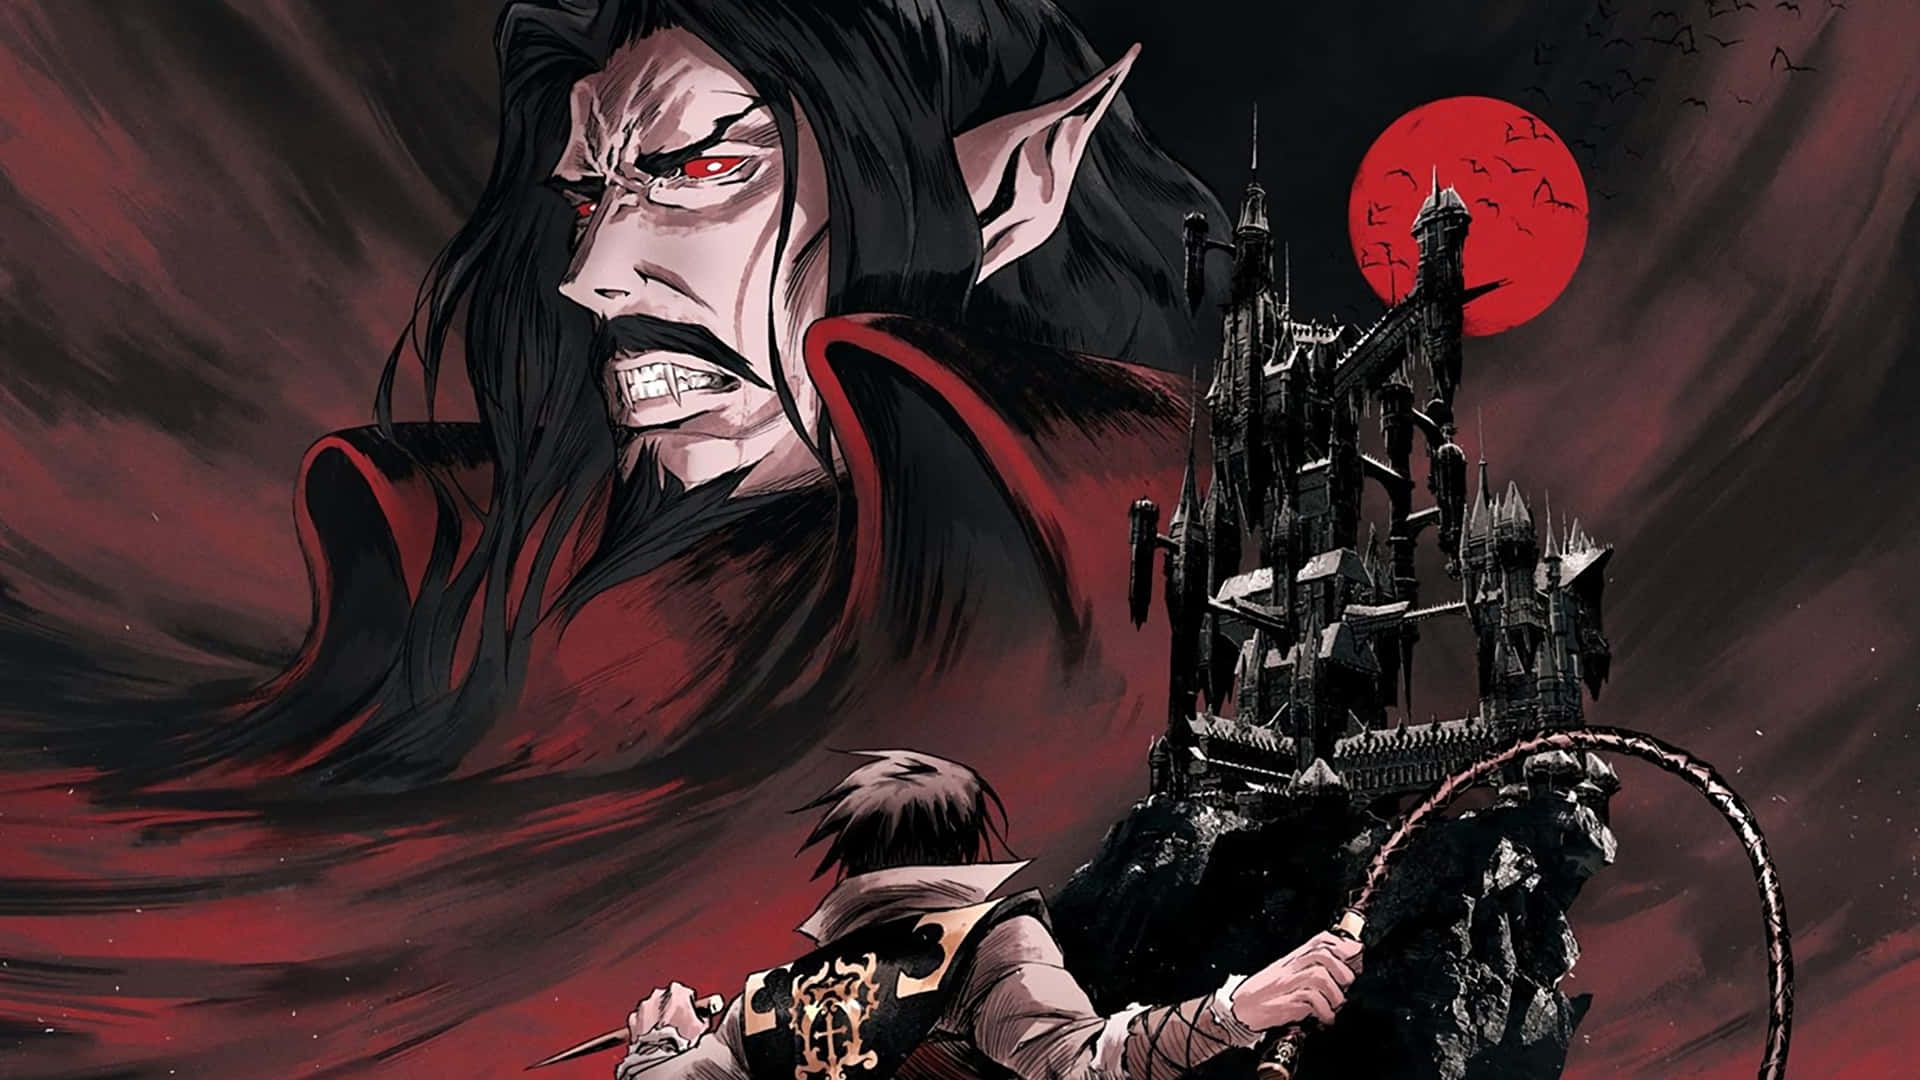 "The Battle of the Belmonts in Castlevania."